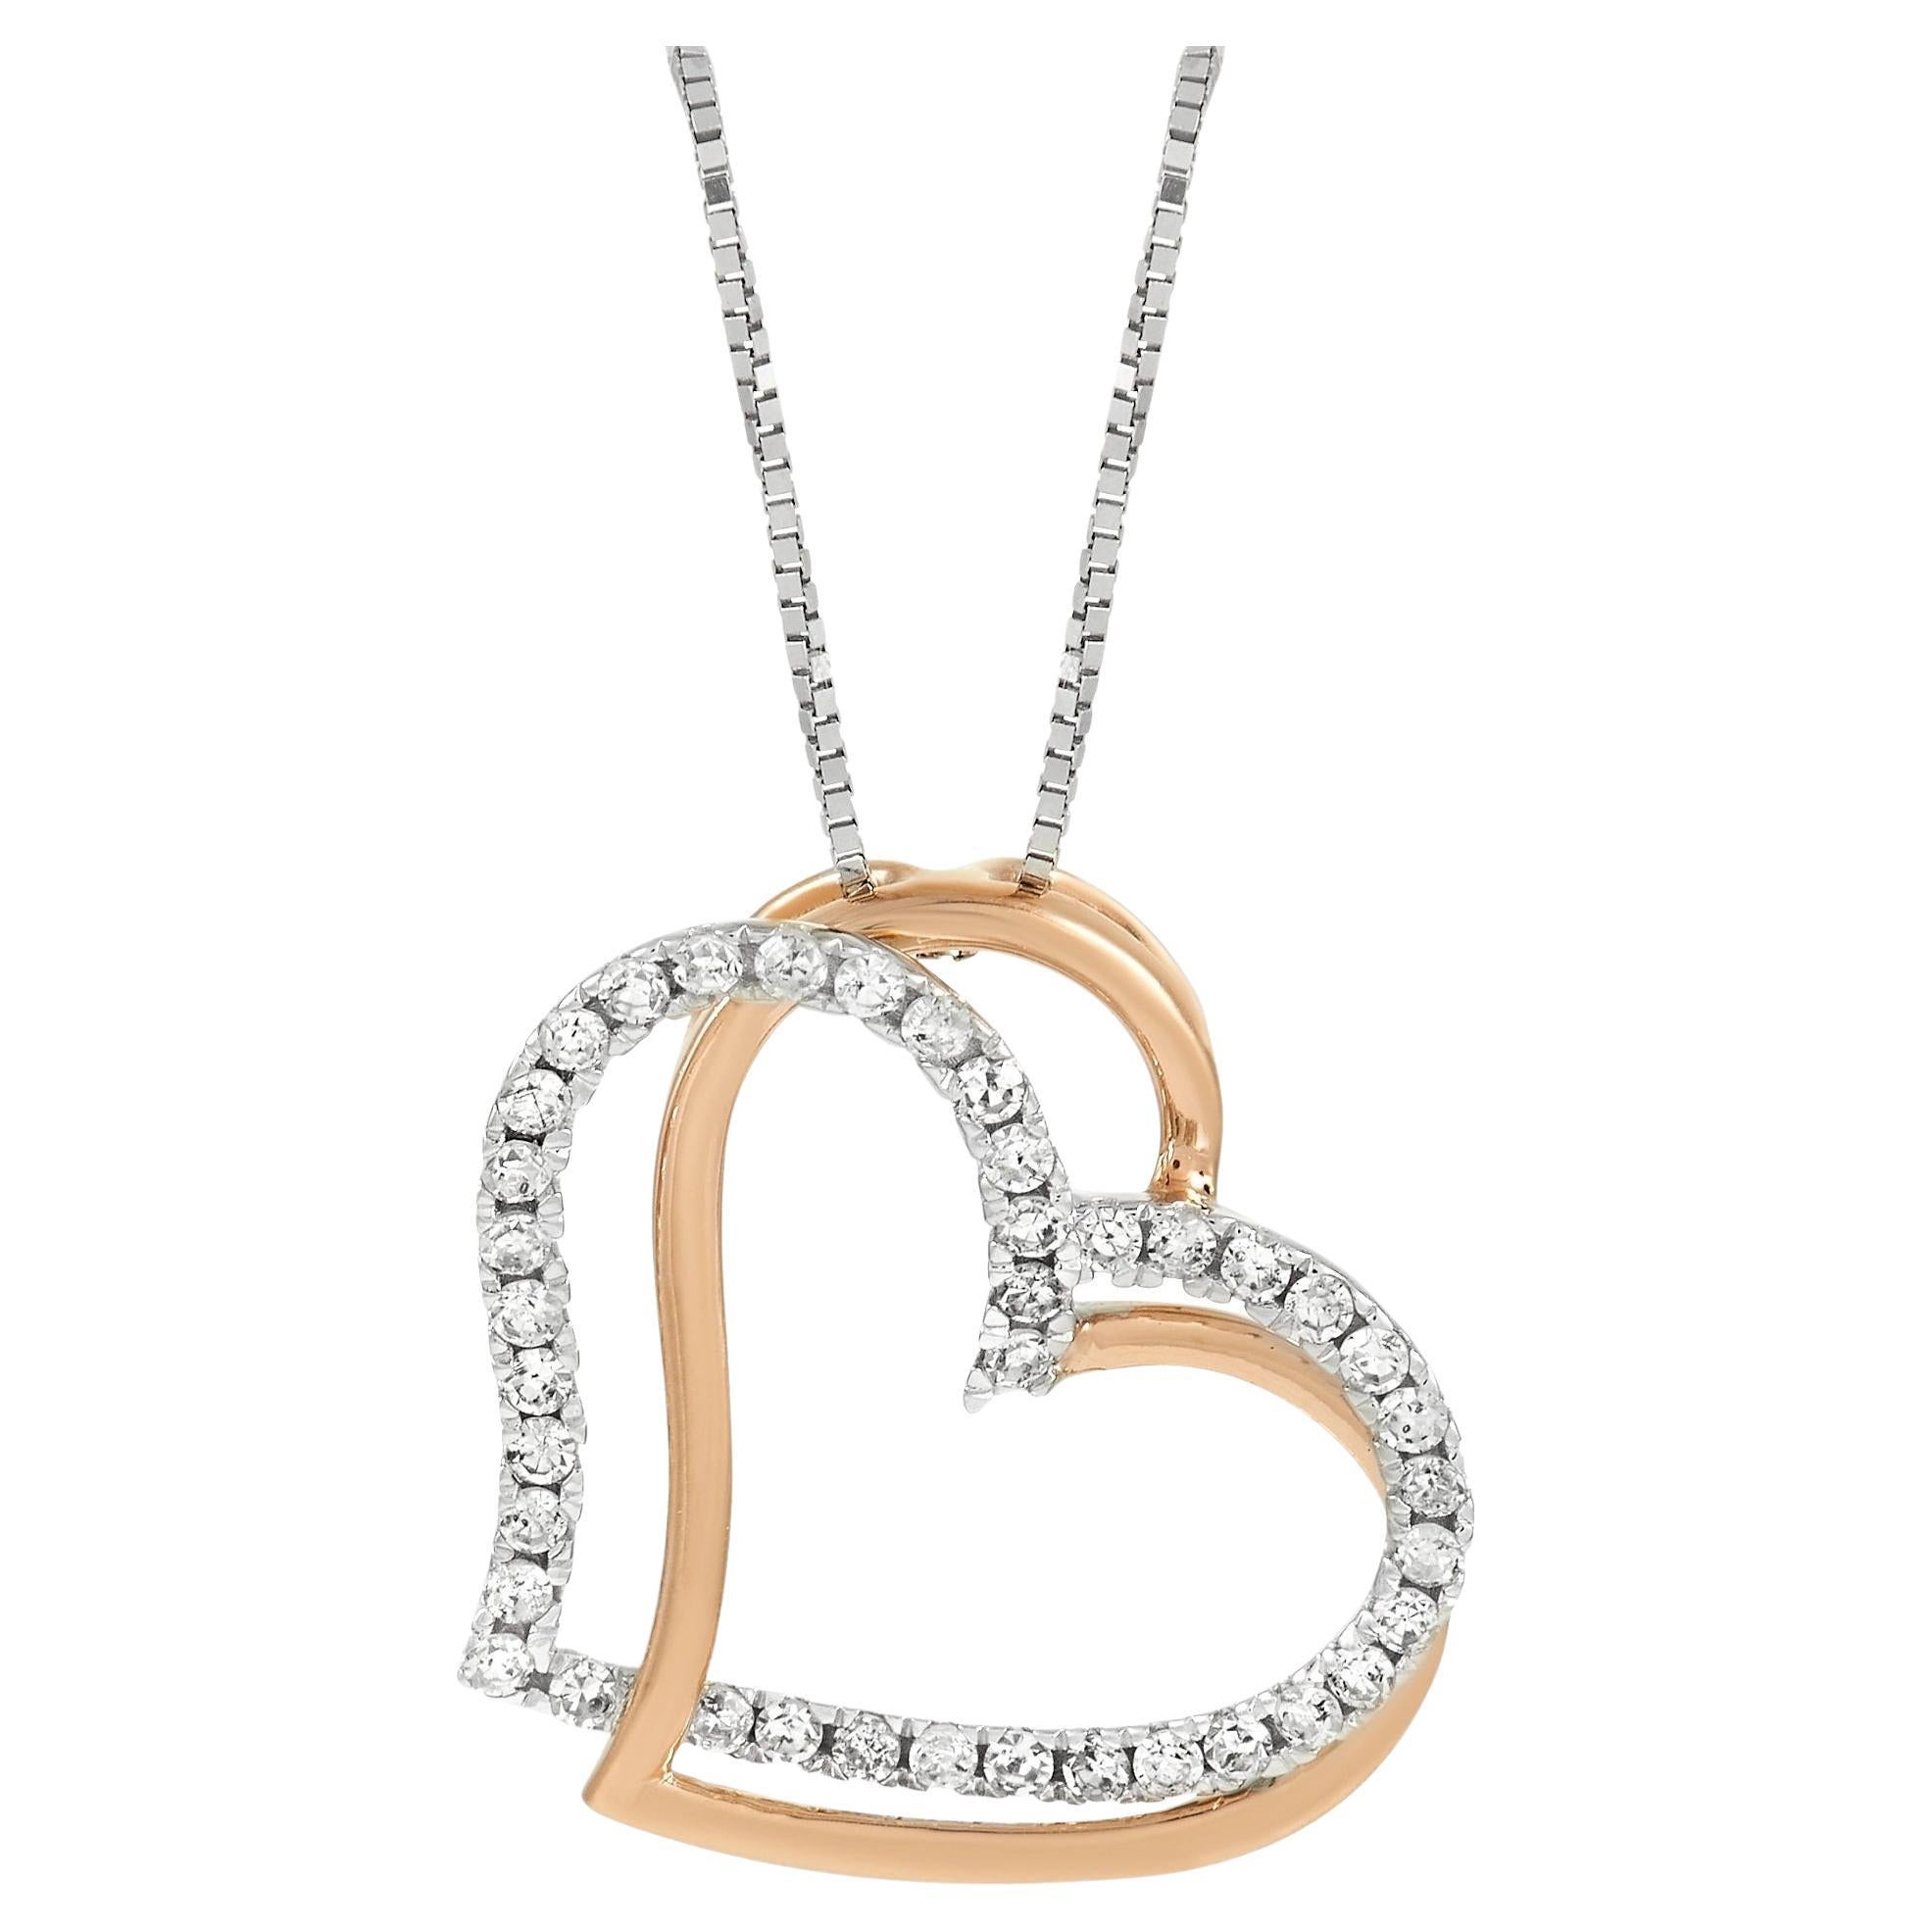 LB Exclusive 14K White and Rose Gold 0.25 Ct Diamond Heart Necklace